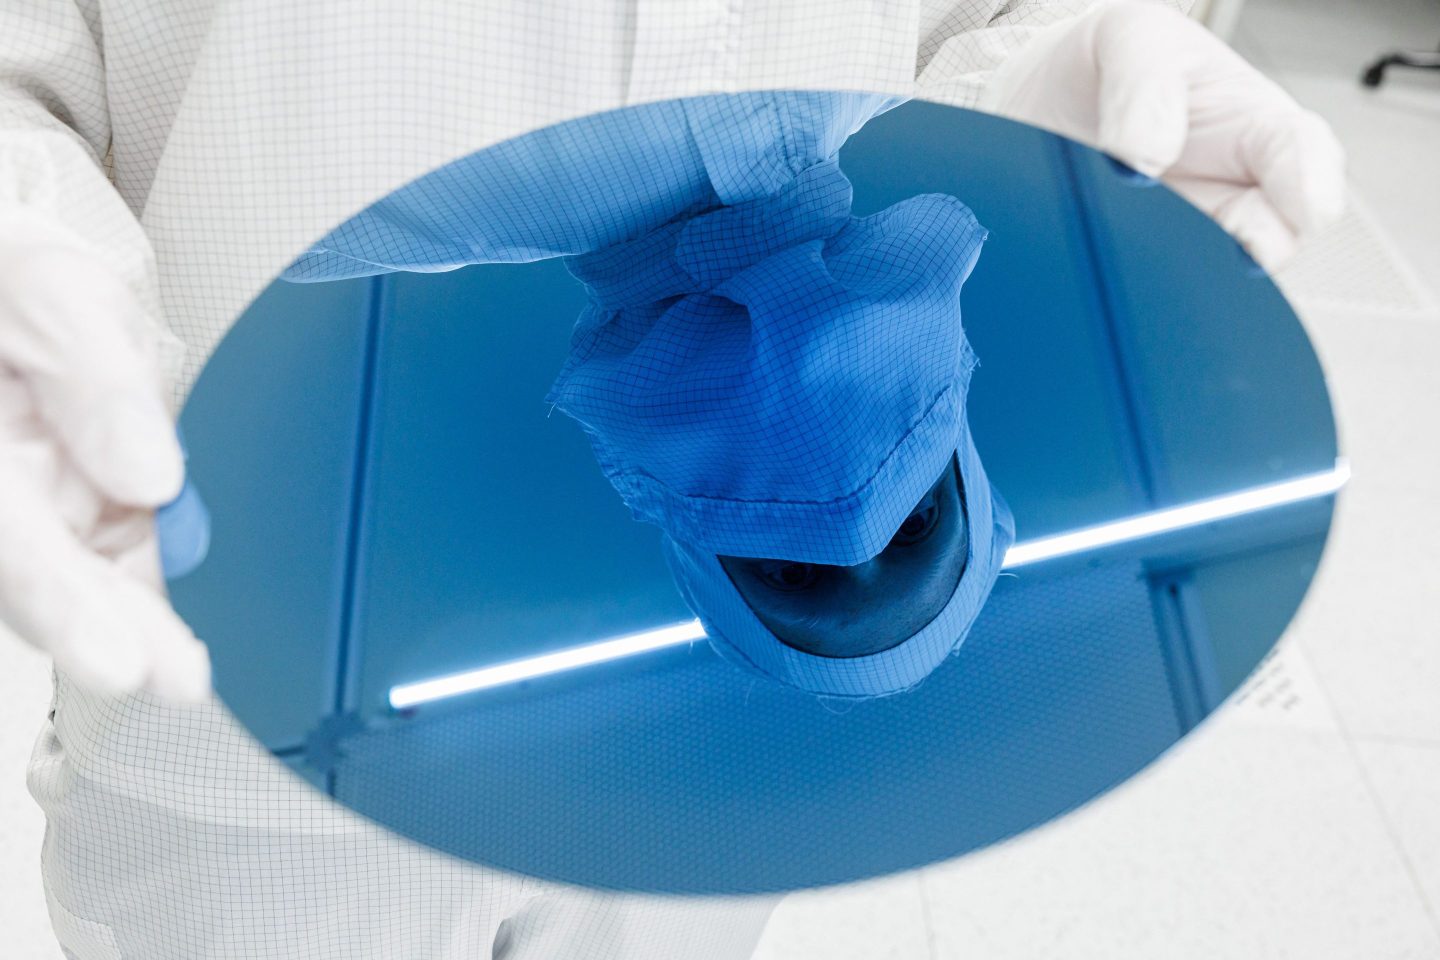 An employee of German semiconductor manufacturer Infineon Technologies AG holds a 300mm test wafer in a clean room at the company&#8217;s plant in Dresden, eastern Germany, on April 26, 2023. &#8211; German chipmaker Infineon will launch the groundbreaking of a new factory, the Smart Power Fab, in Dresden on May 2, 2023. Supply chain snarls during the Coronavirus pandemic have exposed how over-reliant Europe has become on chip imports from abroad in recent years, disrupting numerous industries that depend on the components. The European Union in 2022 launched a plan known as the &#8220;Chips Act&#8221;, which aims to double Europe&#8217;s market share in semiconductors by 2030. (Photo by JENS SCHLUETER / AFP) (Photo by JENS SCHLUETER/AFP via Getty Images)